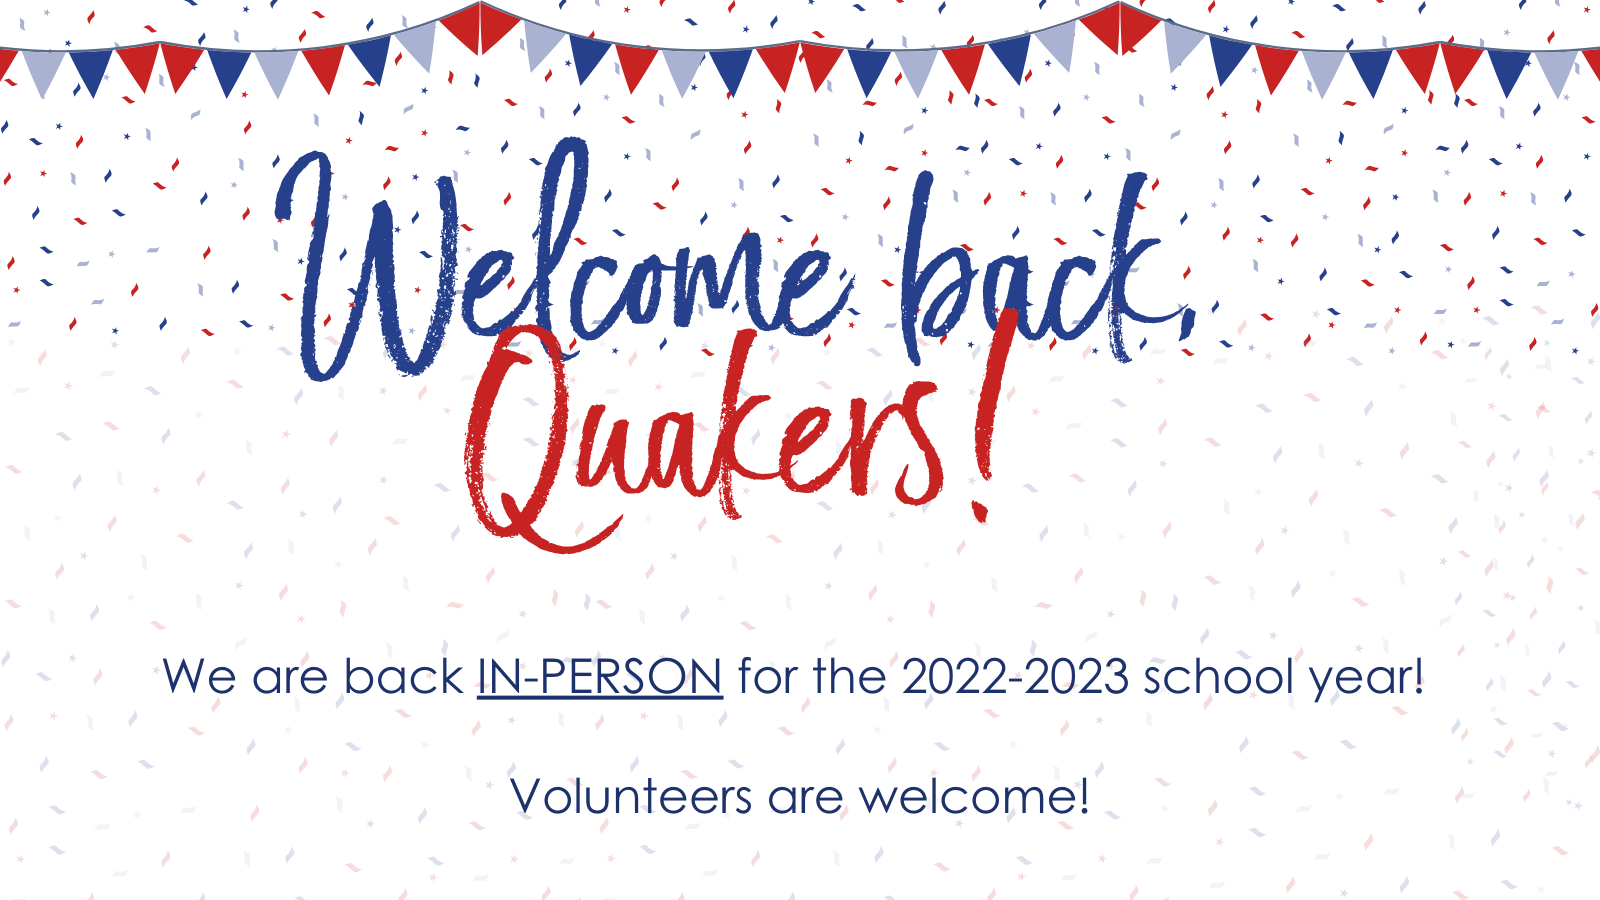 Welcome back, Quakers!